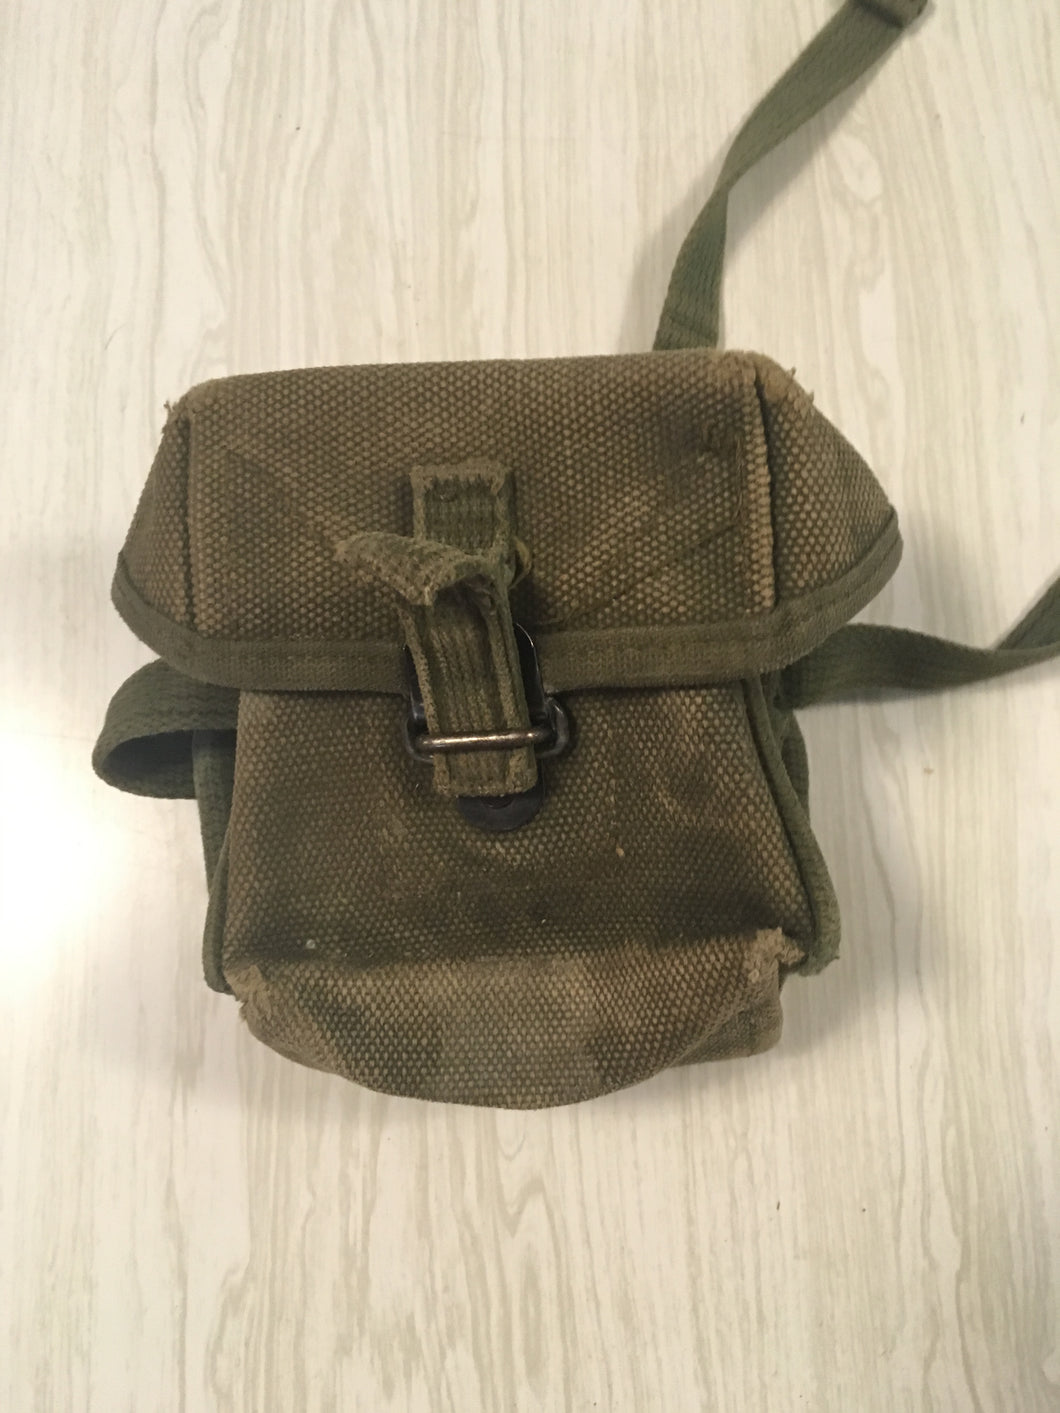 Well Worn - But Functional Early Alice Clip Ammo Pouch~Approx 4 Inches High